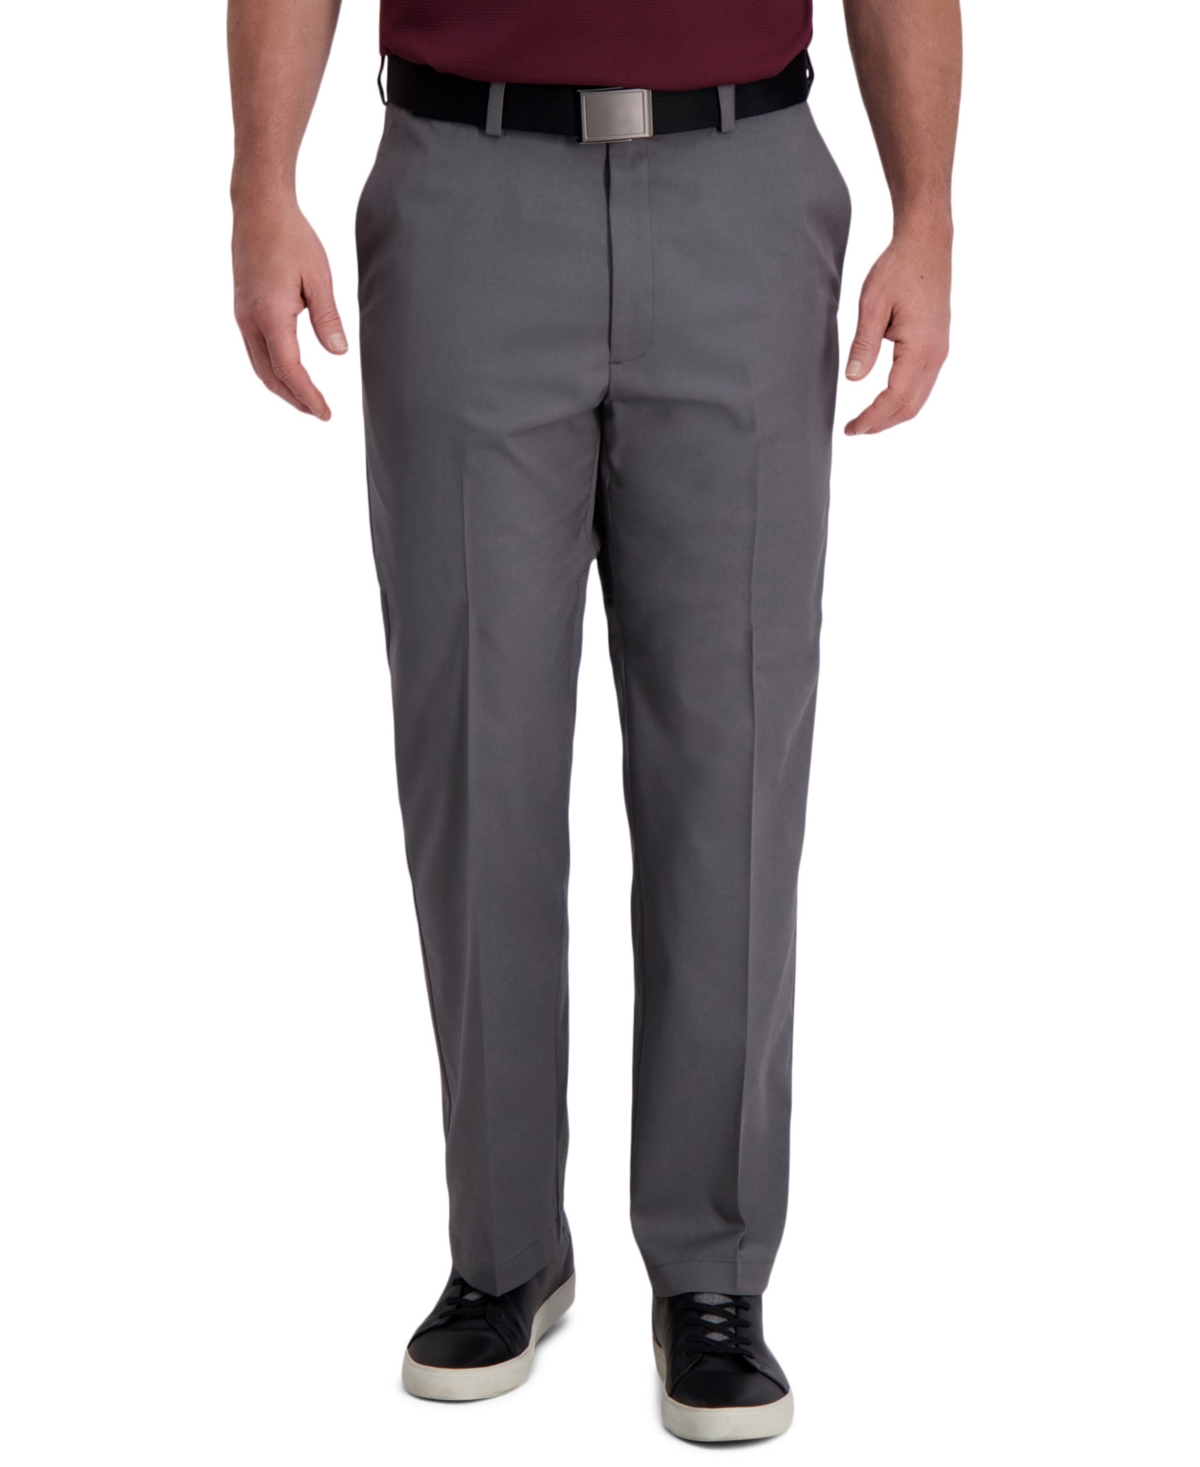 Cool Right Performance Flex Classic Fit Flat Front Pant - Dark Grey Heather